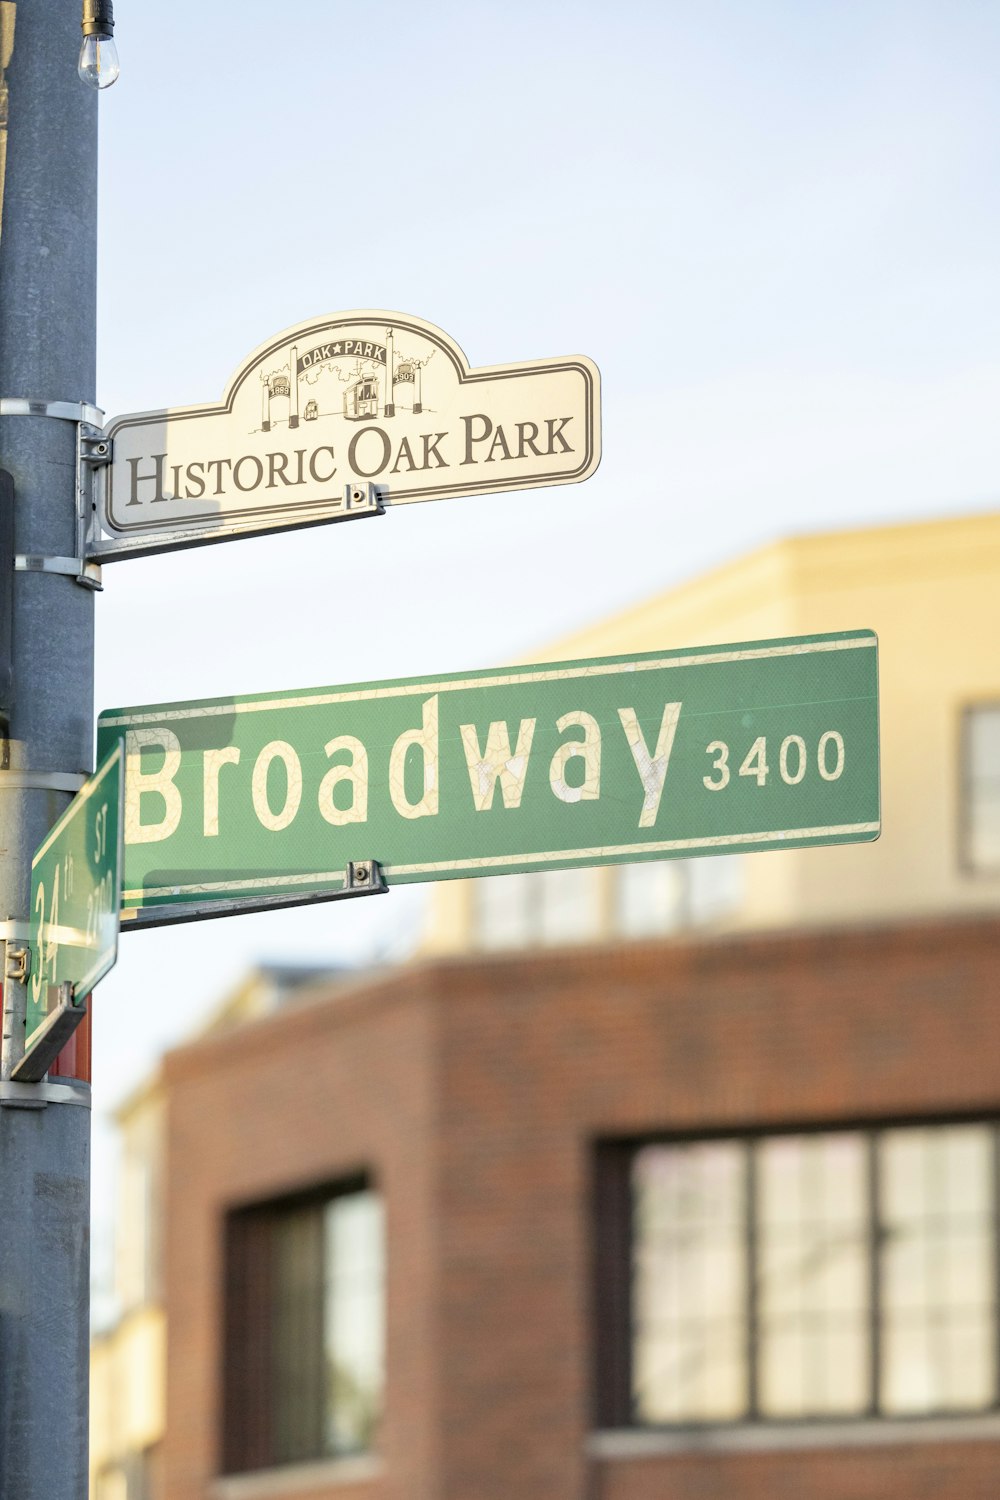 a street sign for broadway and historic oak park